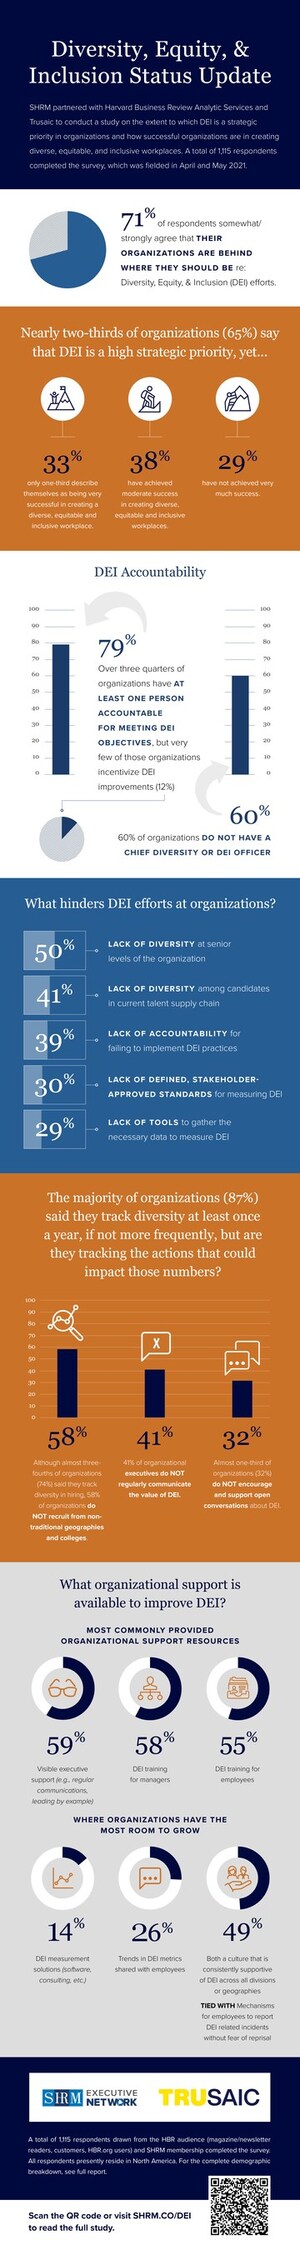 New Research Suggests Visible Support from the C-Suite, Better Data Practices Key to Increasing Diversity, Equity, and Inclusion